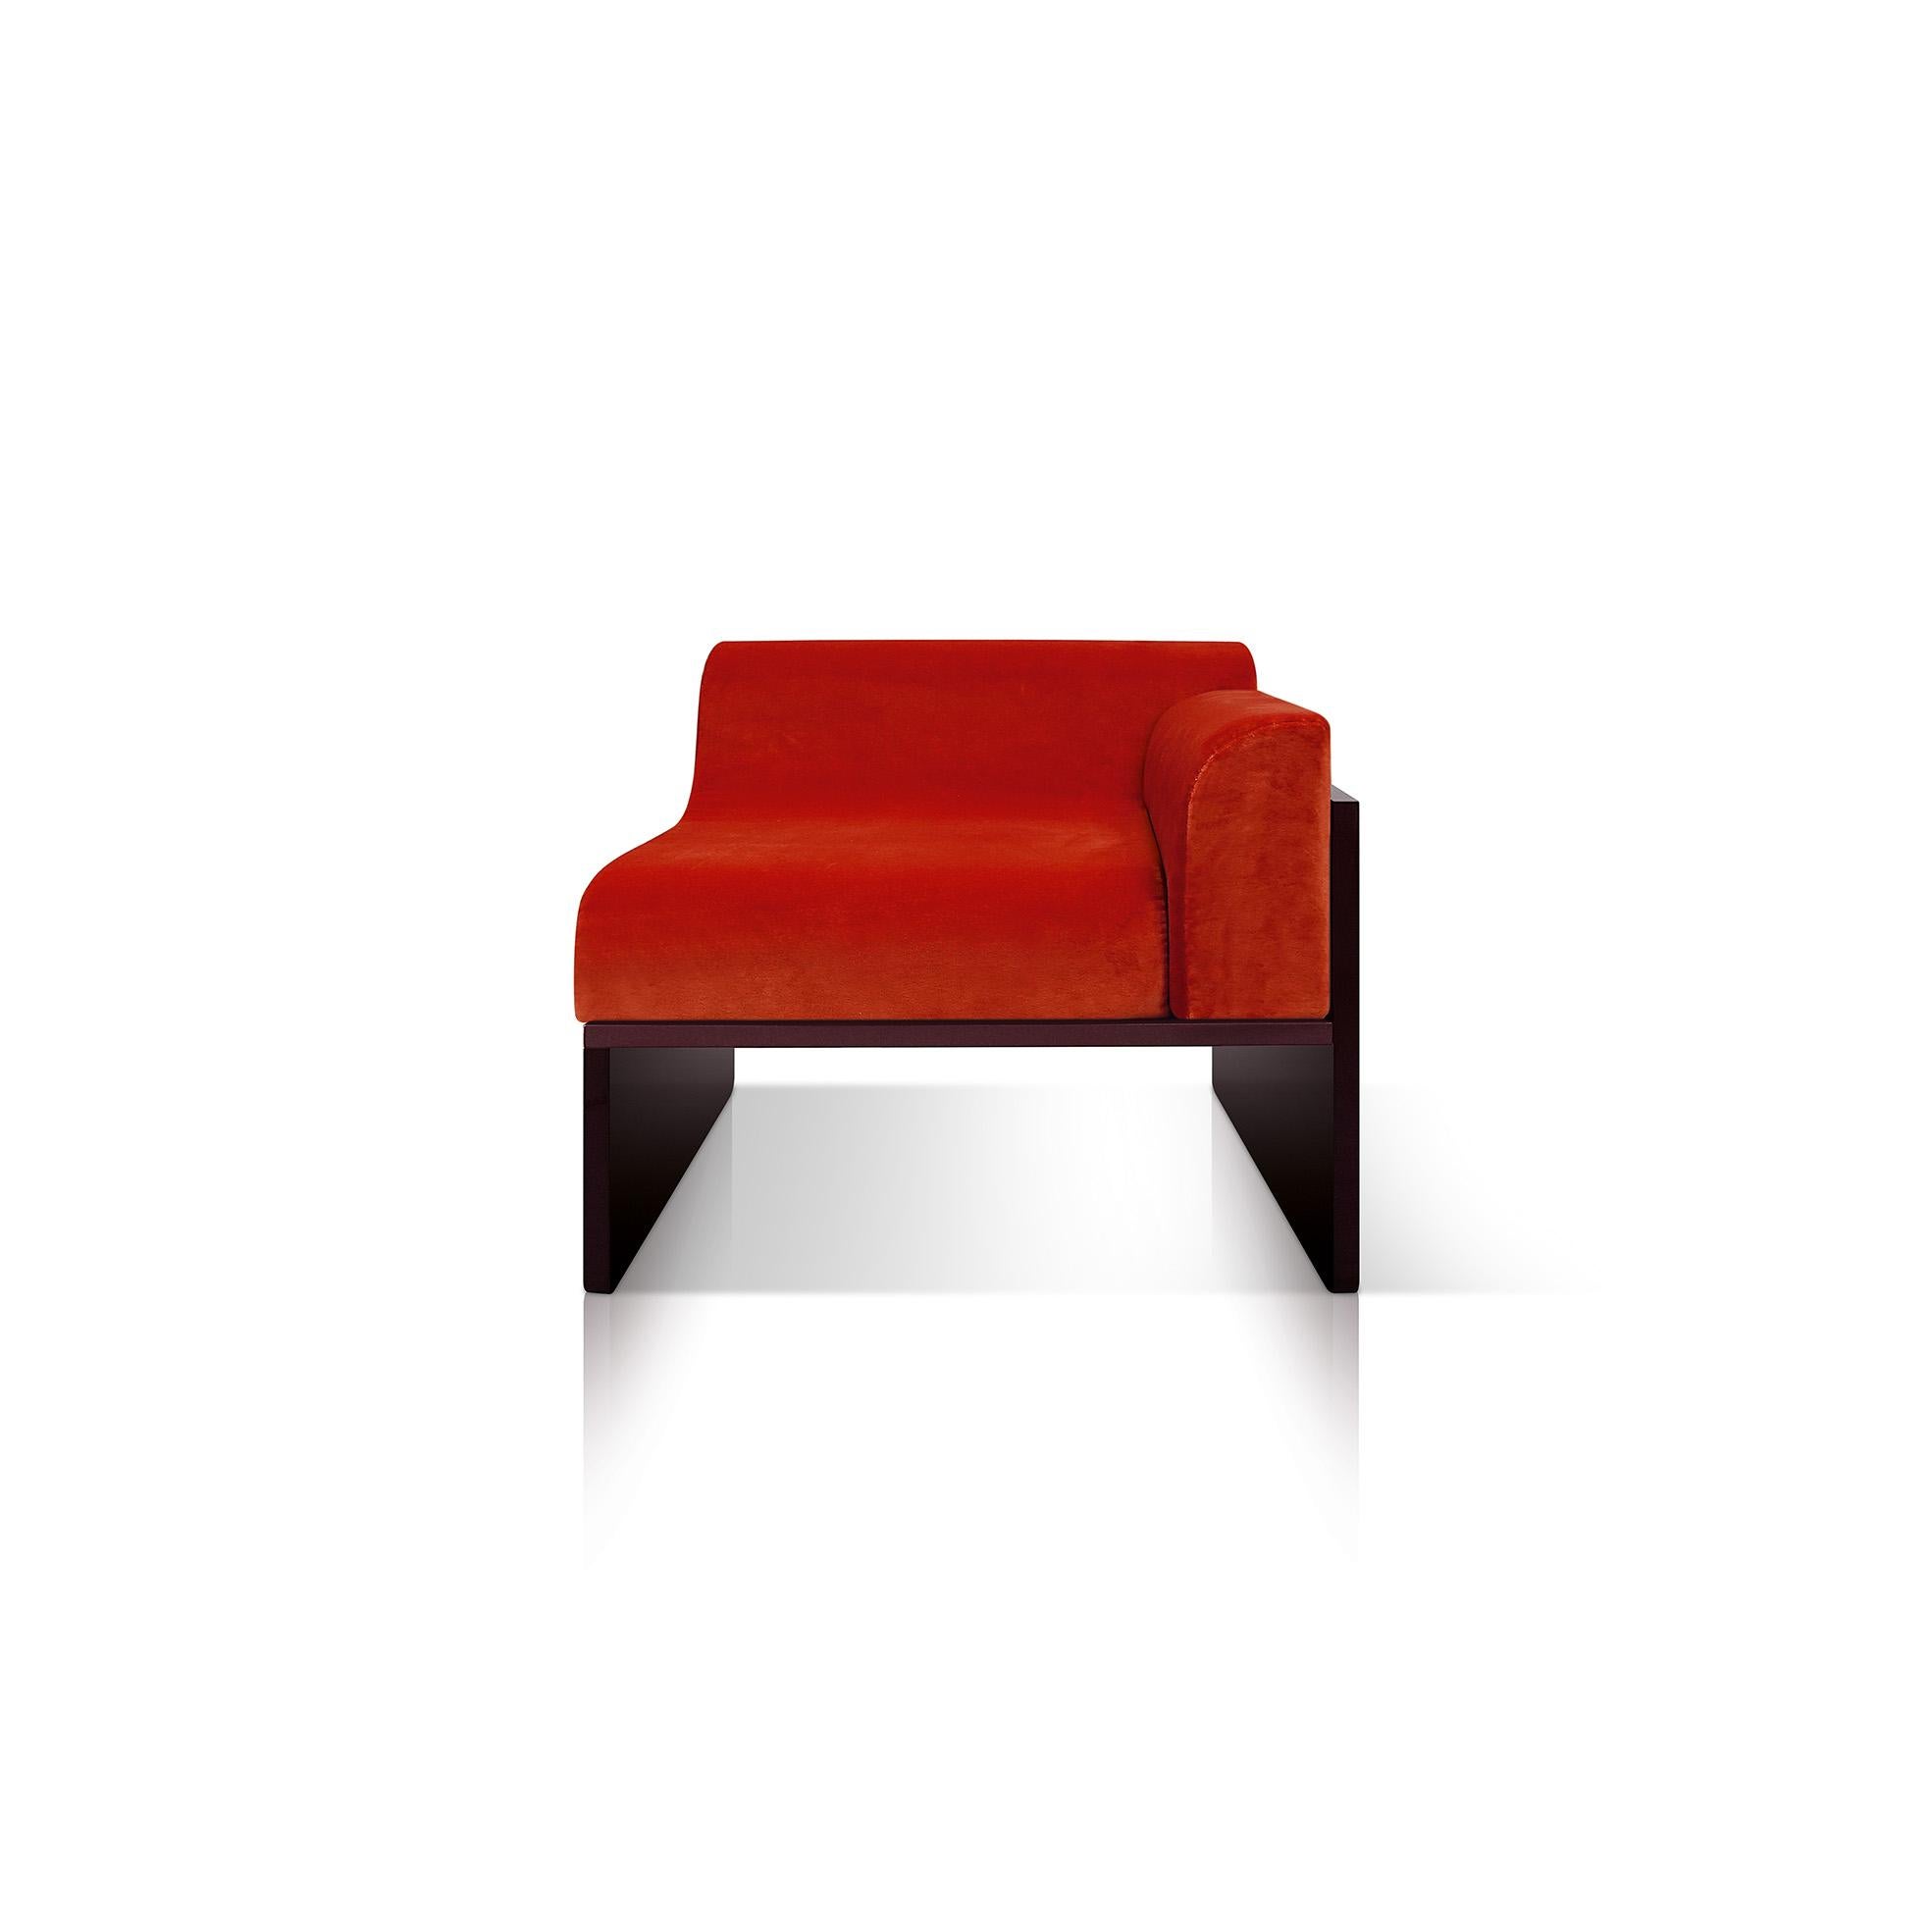 Dino is another key piece in the collection that salutes to Milanese style, this specifically to Dino Gavina’s iconic Simone. The bright contrasting colors and irresistible tactility of the velvet and high gloss surface give the minimalist in the